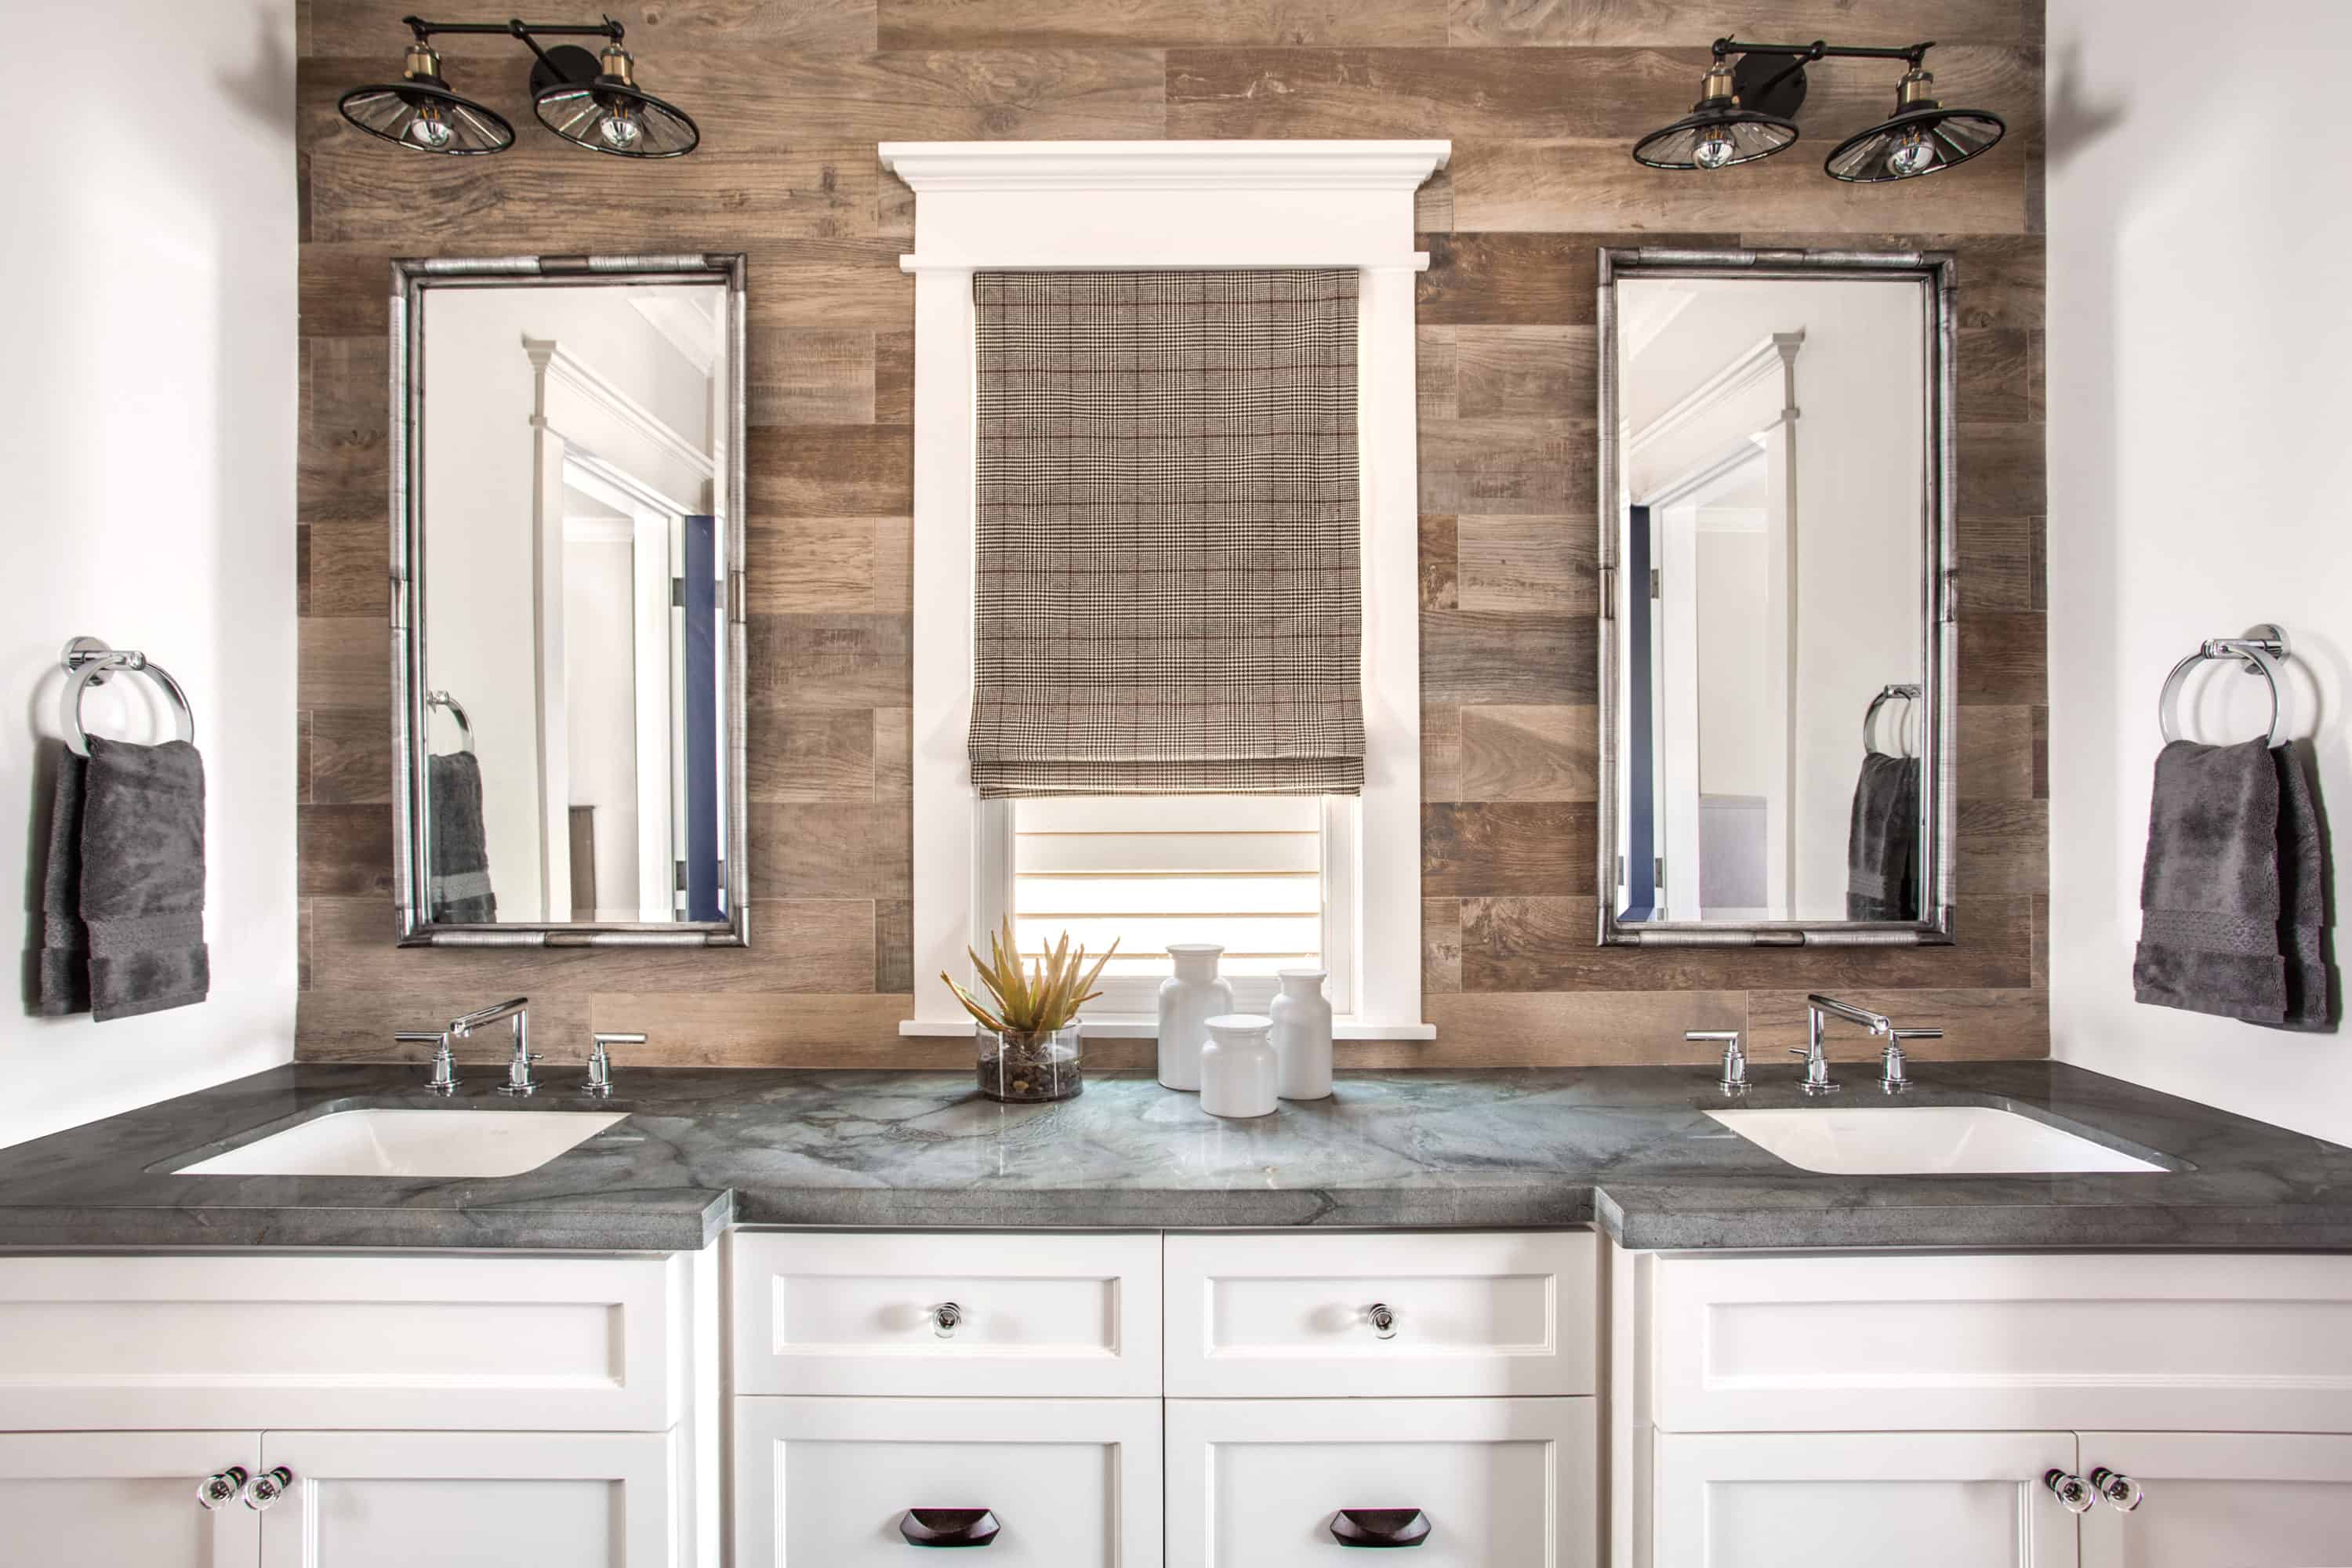 Quartzite is a lovely natural stone to use for master bath countertops